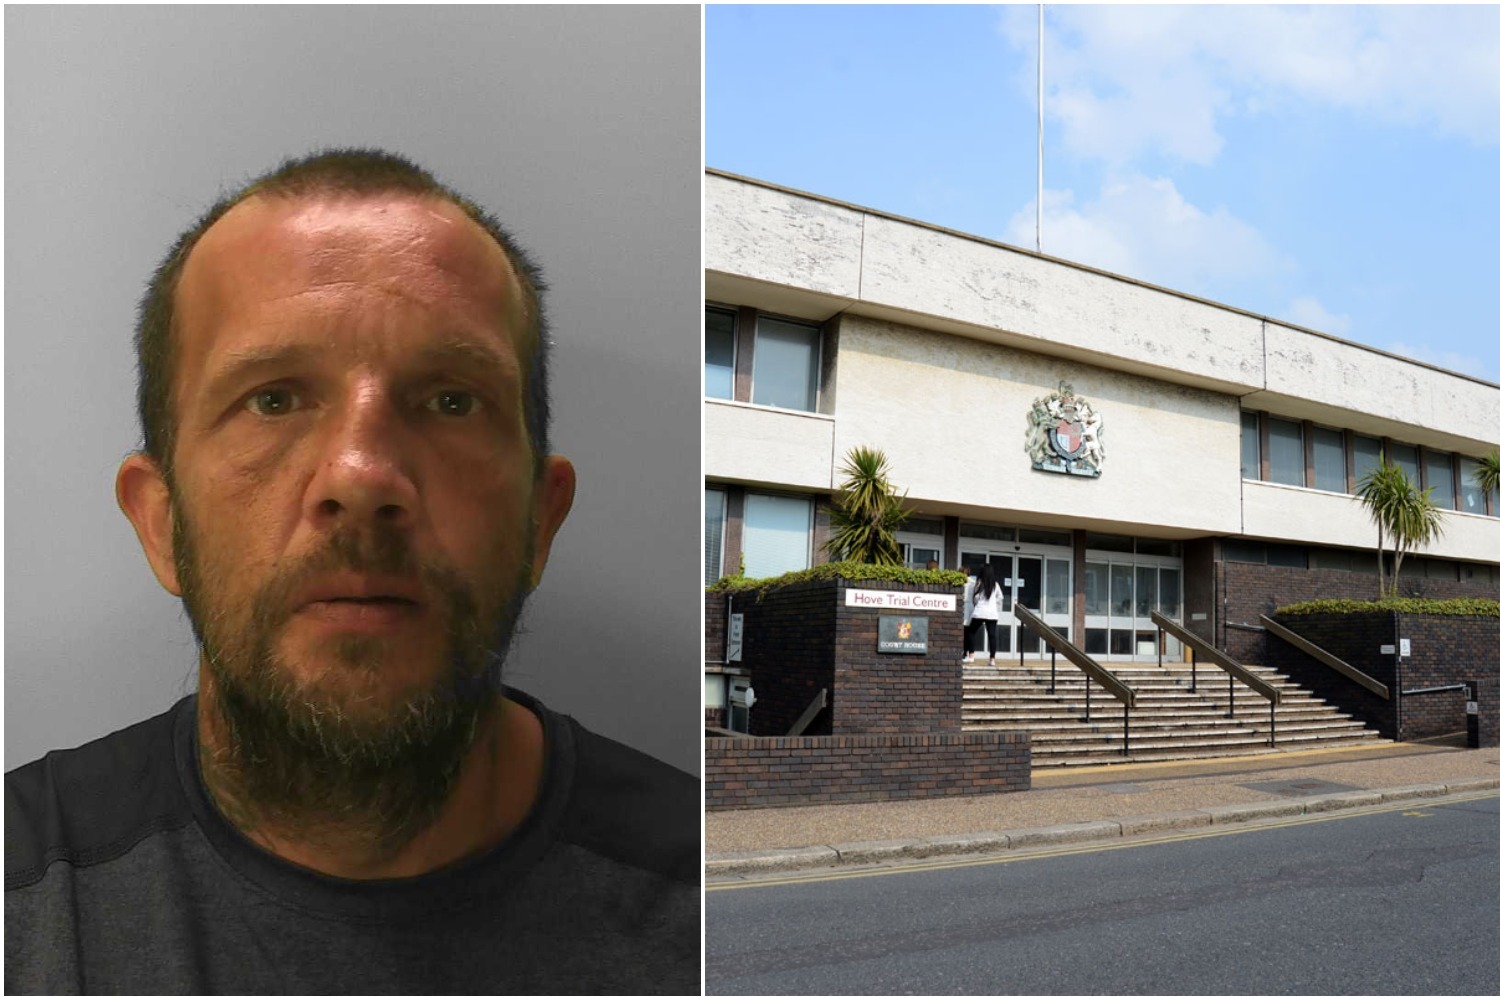 Thug smashed lamp over his head before chasing woman with a knife